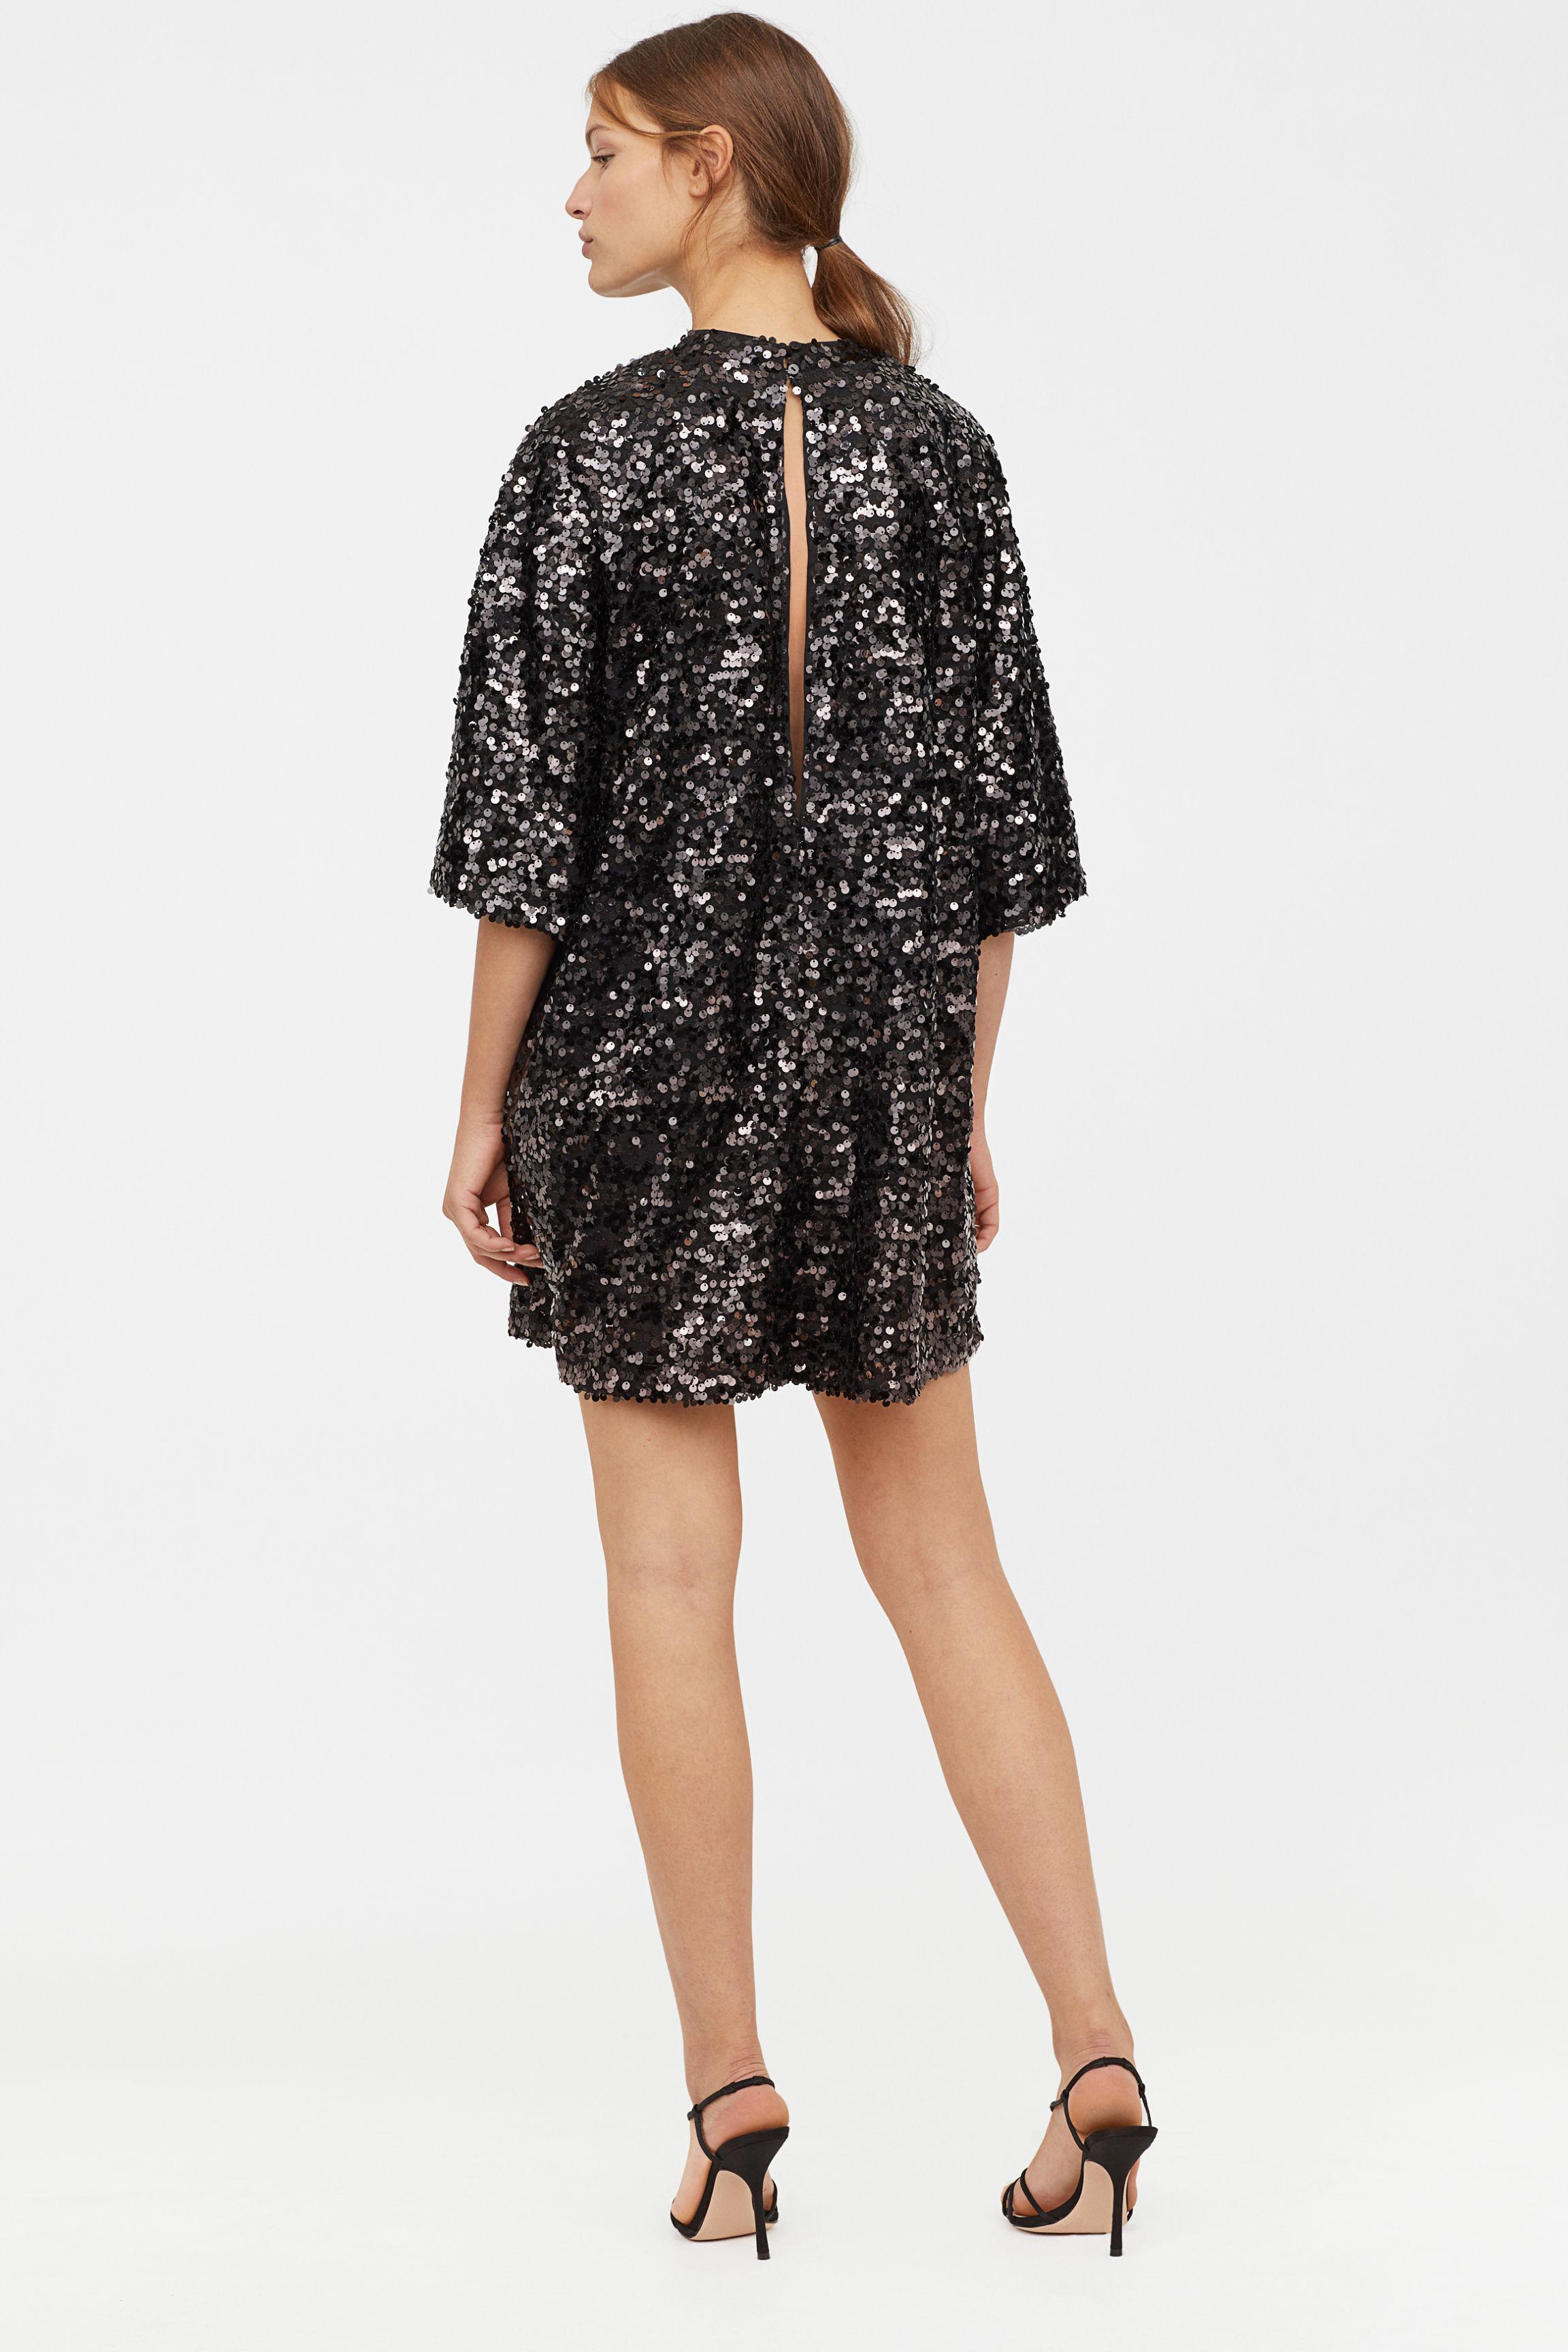 H&M Sequined Dress in Black Lyst